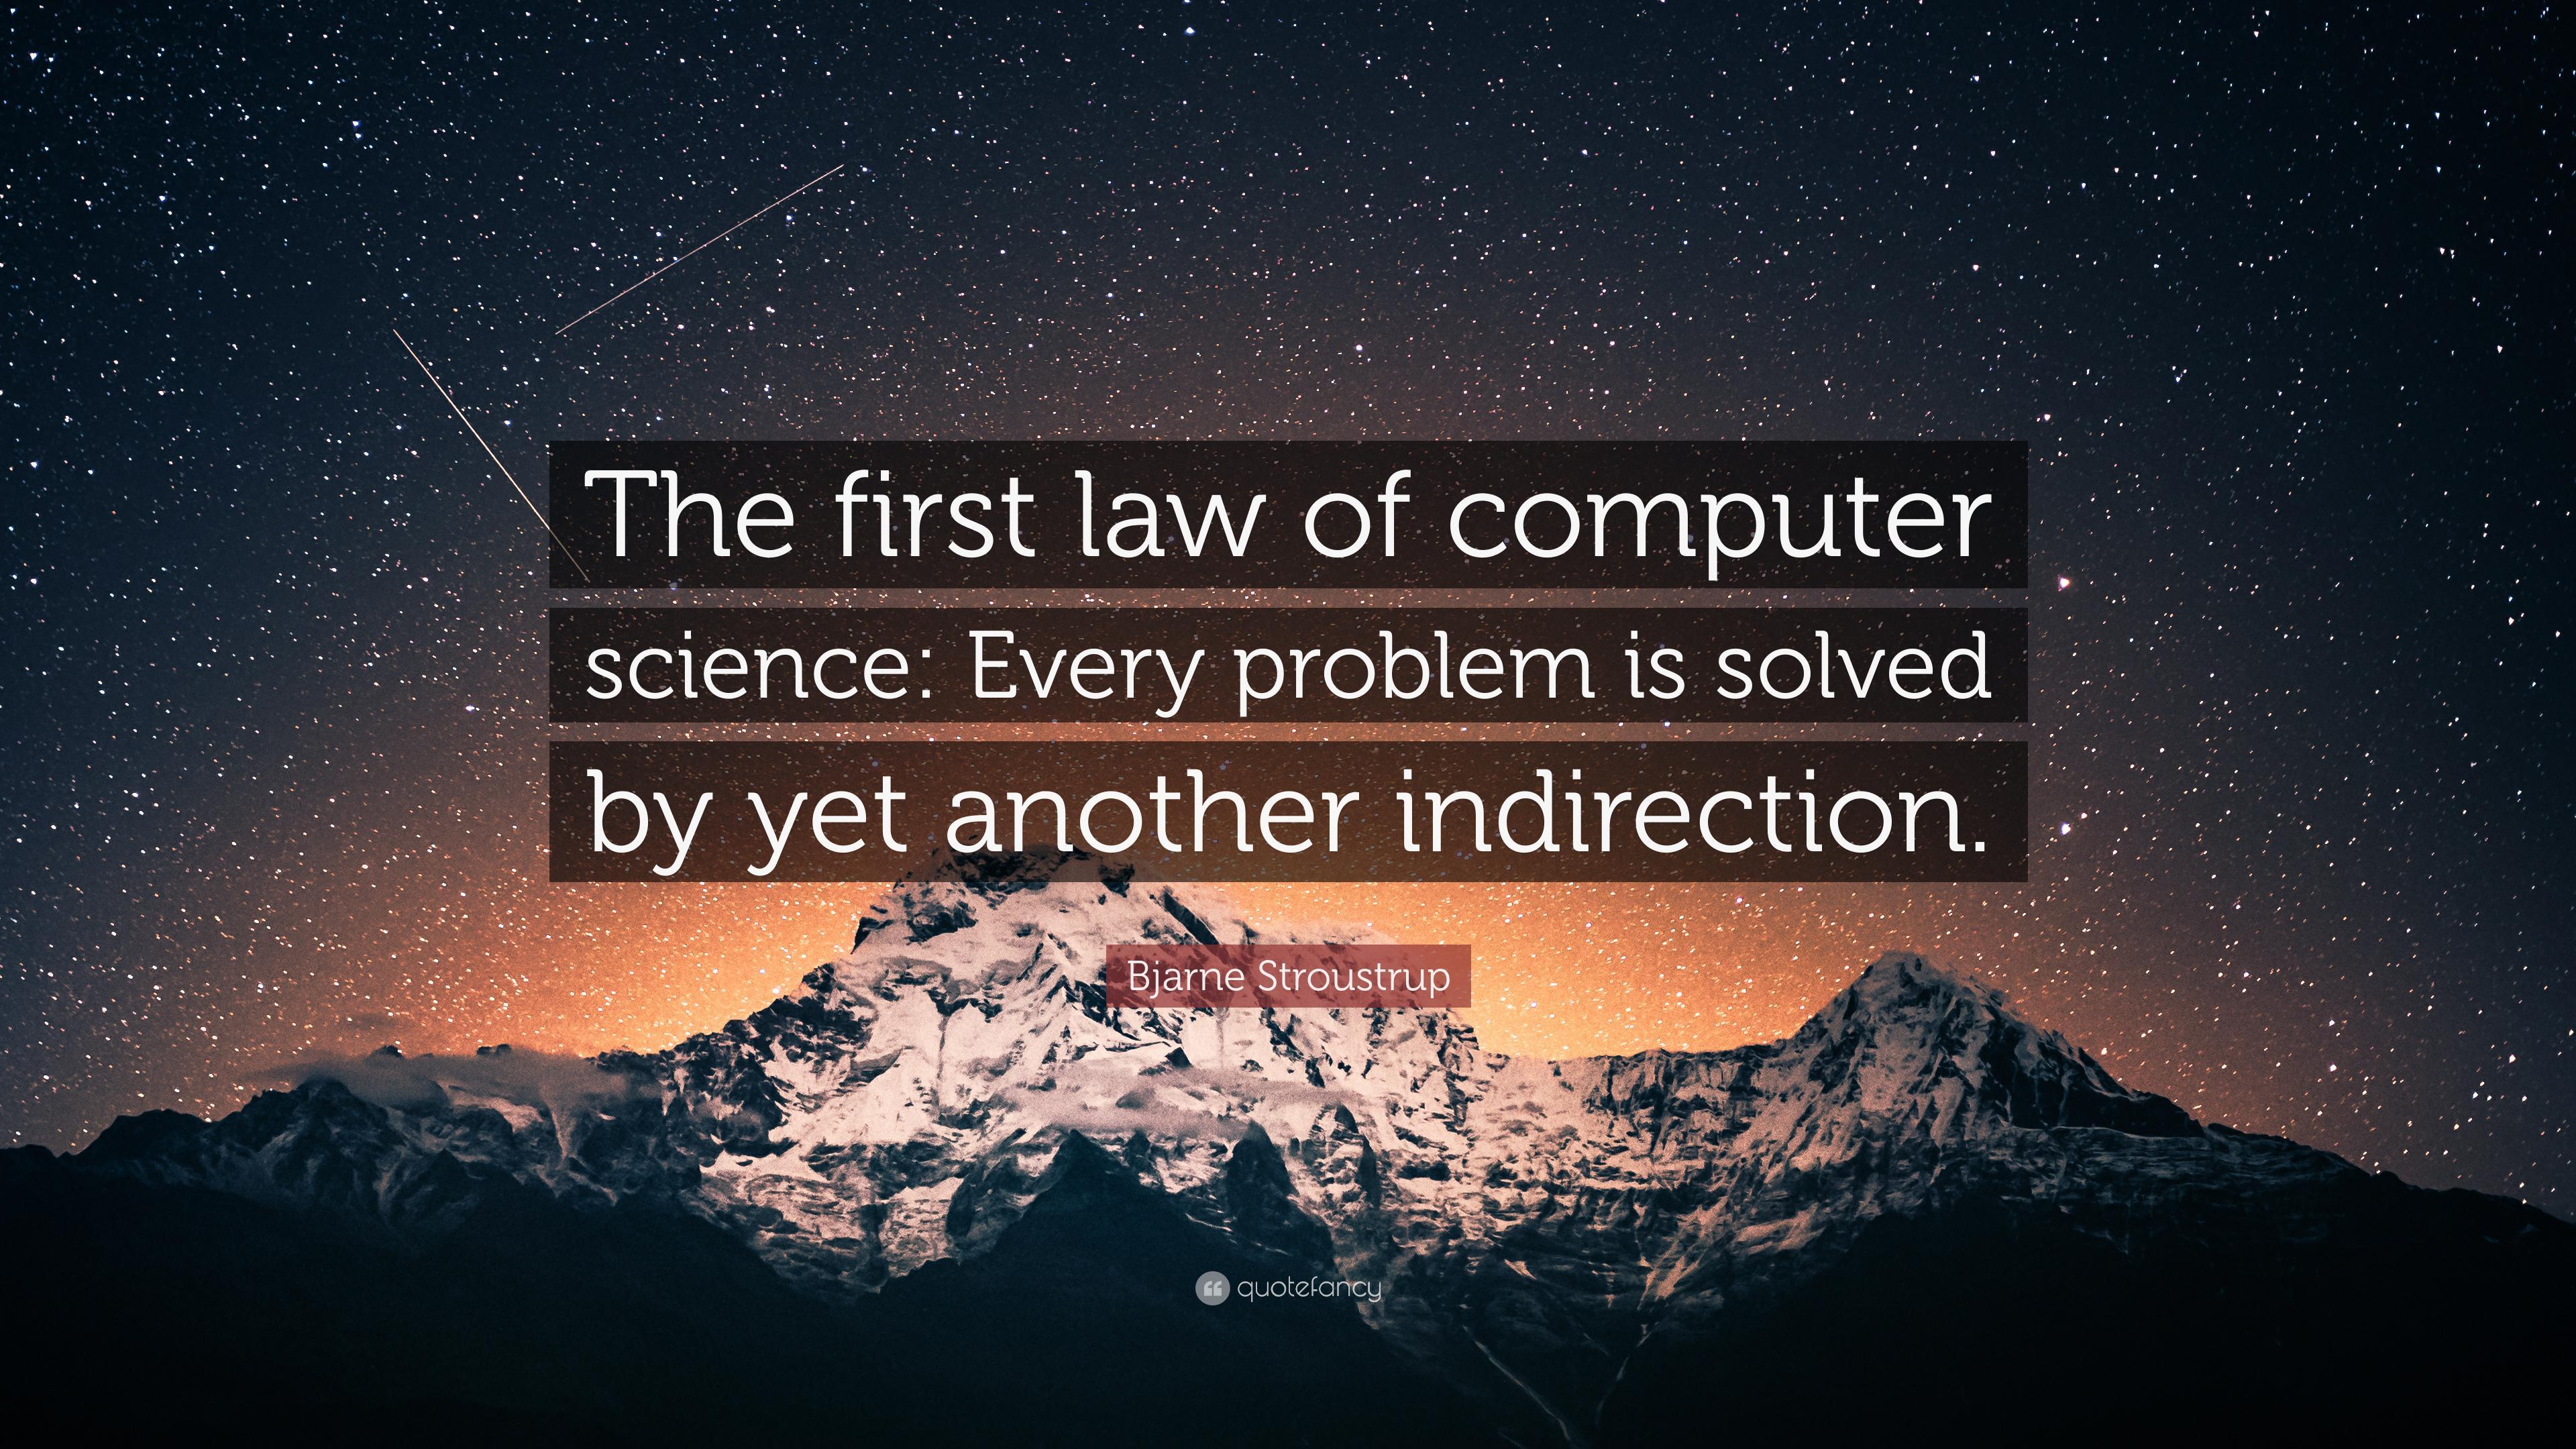 Bjarne Stroustrup Quote: “The first law of computer science: Every